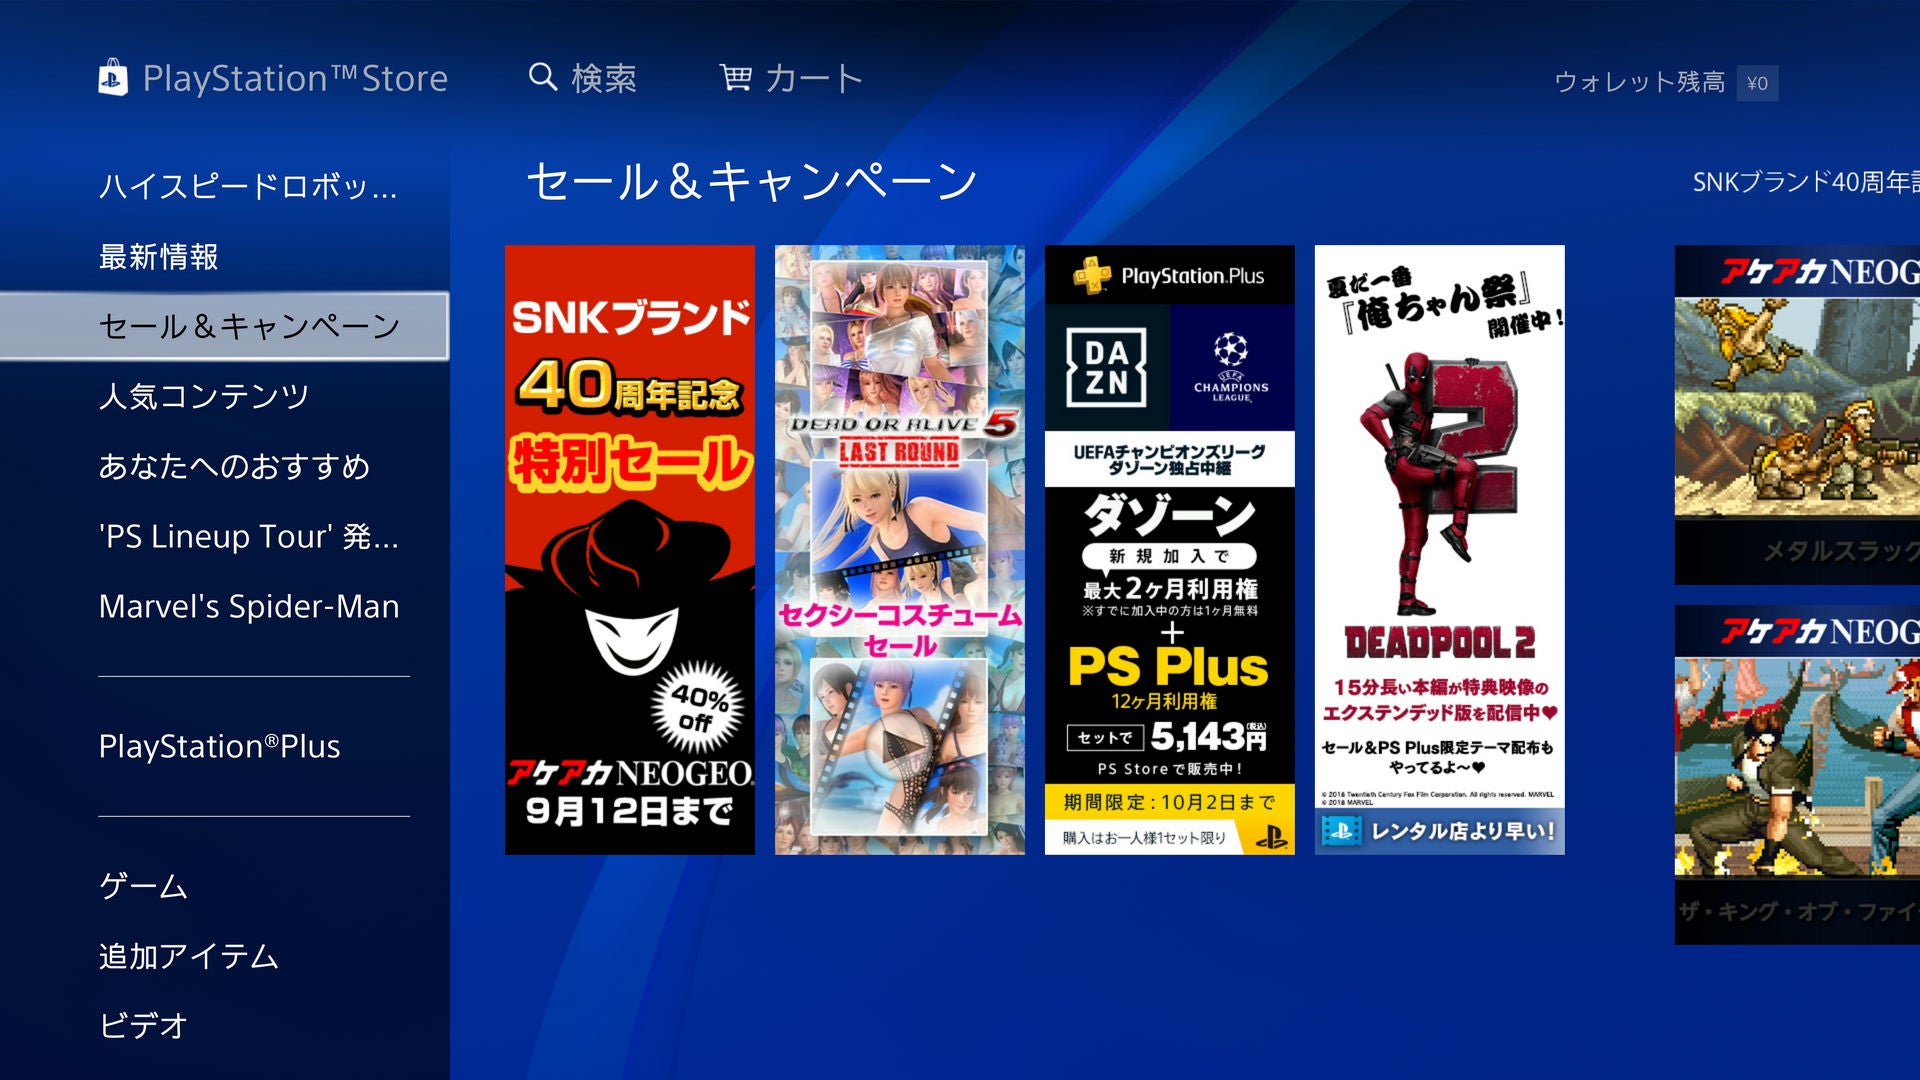 Image for How to create a Japanese PSN account to get Japan-exclusive PS4 demos, themes and other freebies